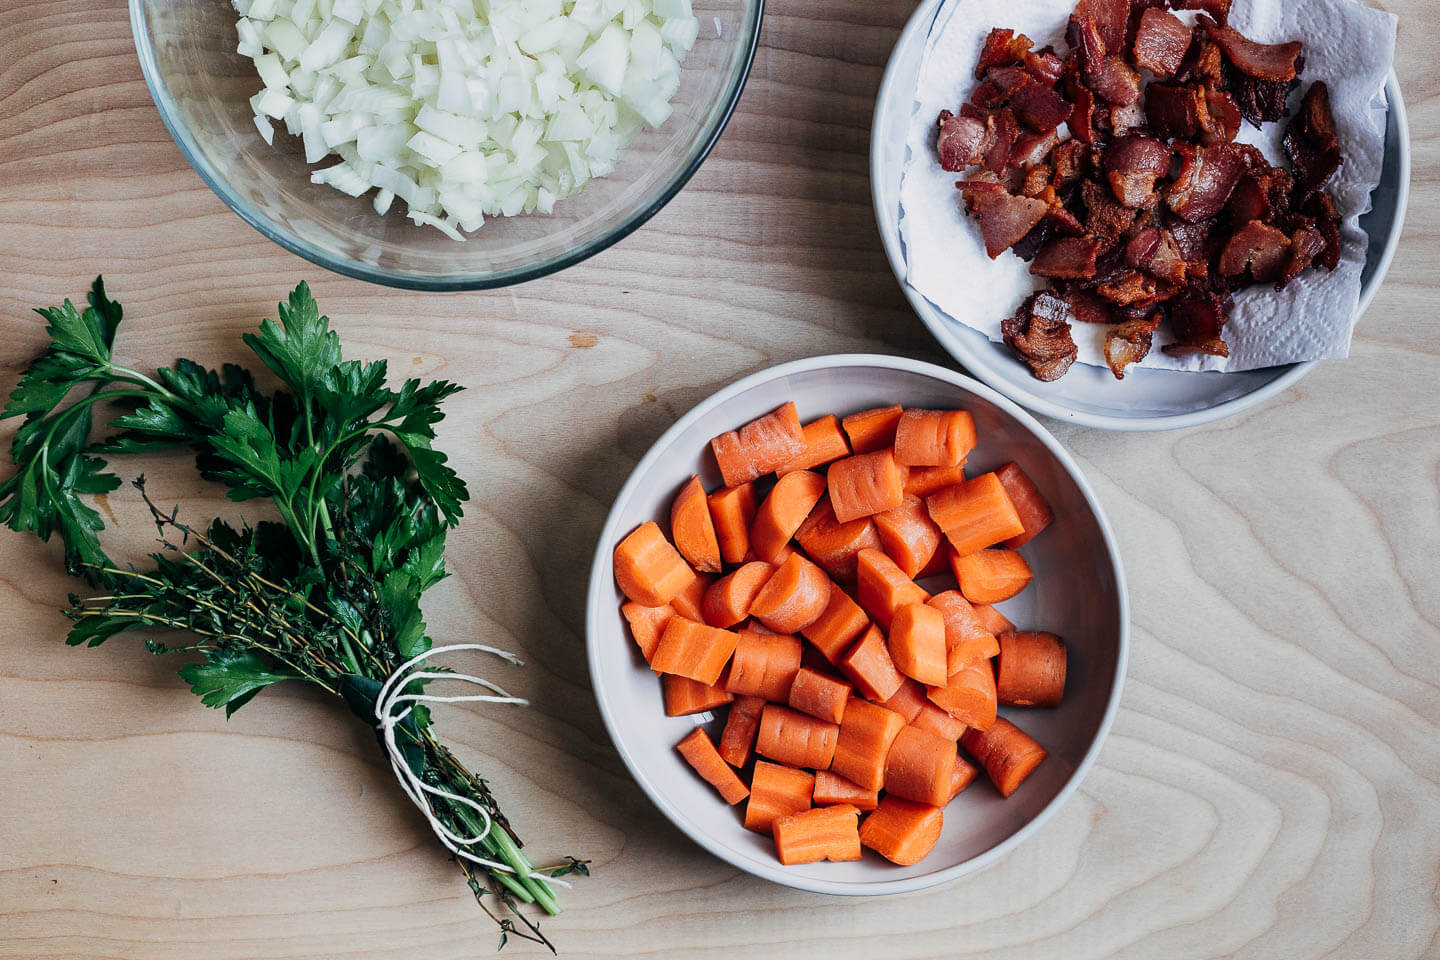 Mise en place: bowls of diced onions, cooked lardons, and chopped carrots, and a bouquet garnis